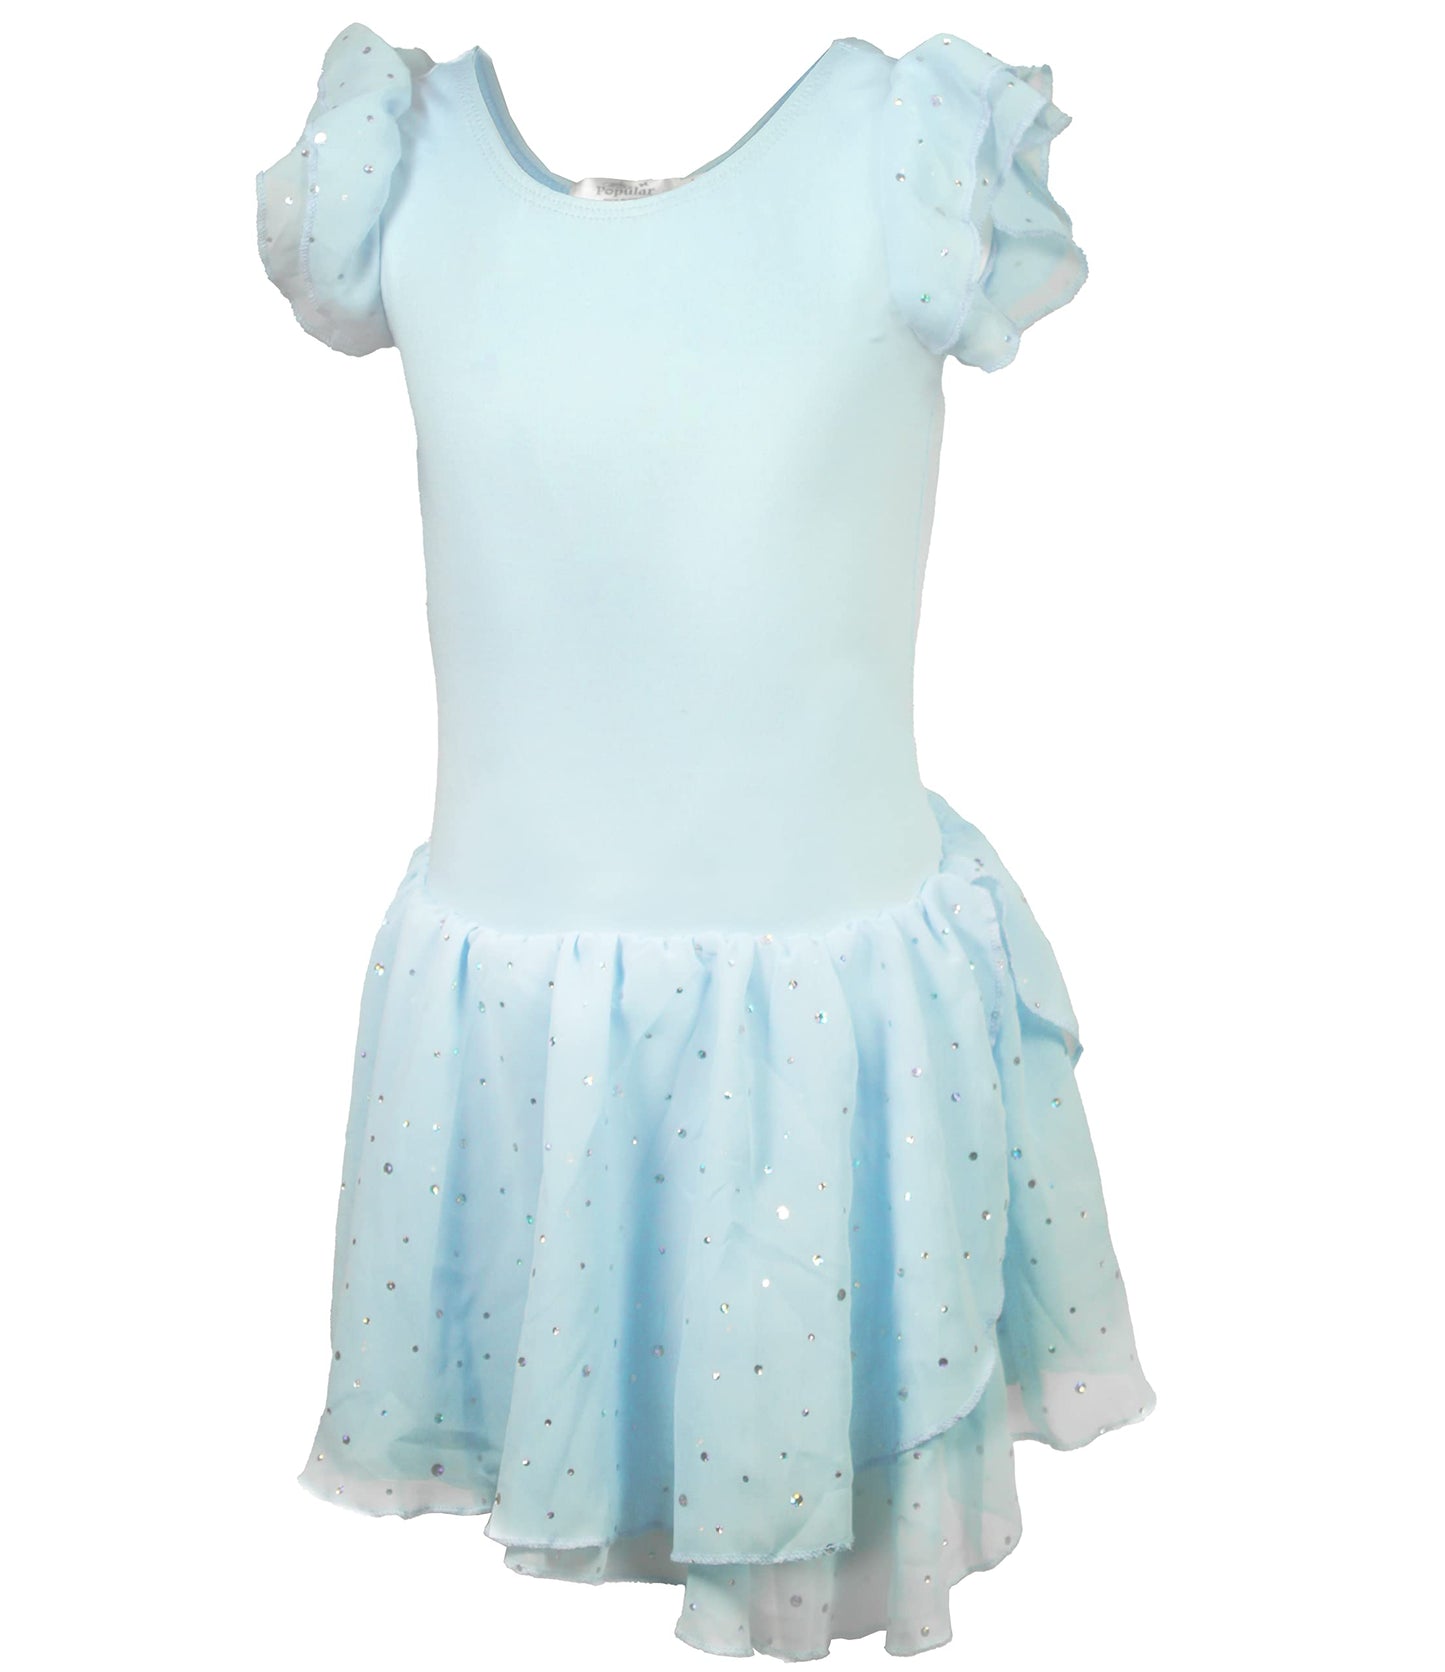 Girls Leotard Ballet Dance Dress with Round Sequins Sparkled Ruffle Sleeves and Tutu